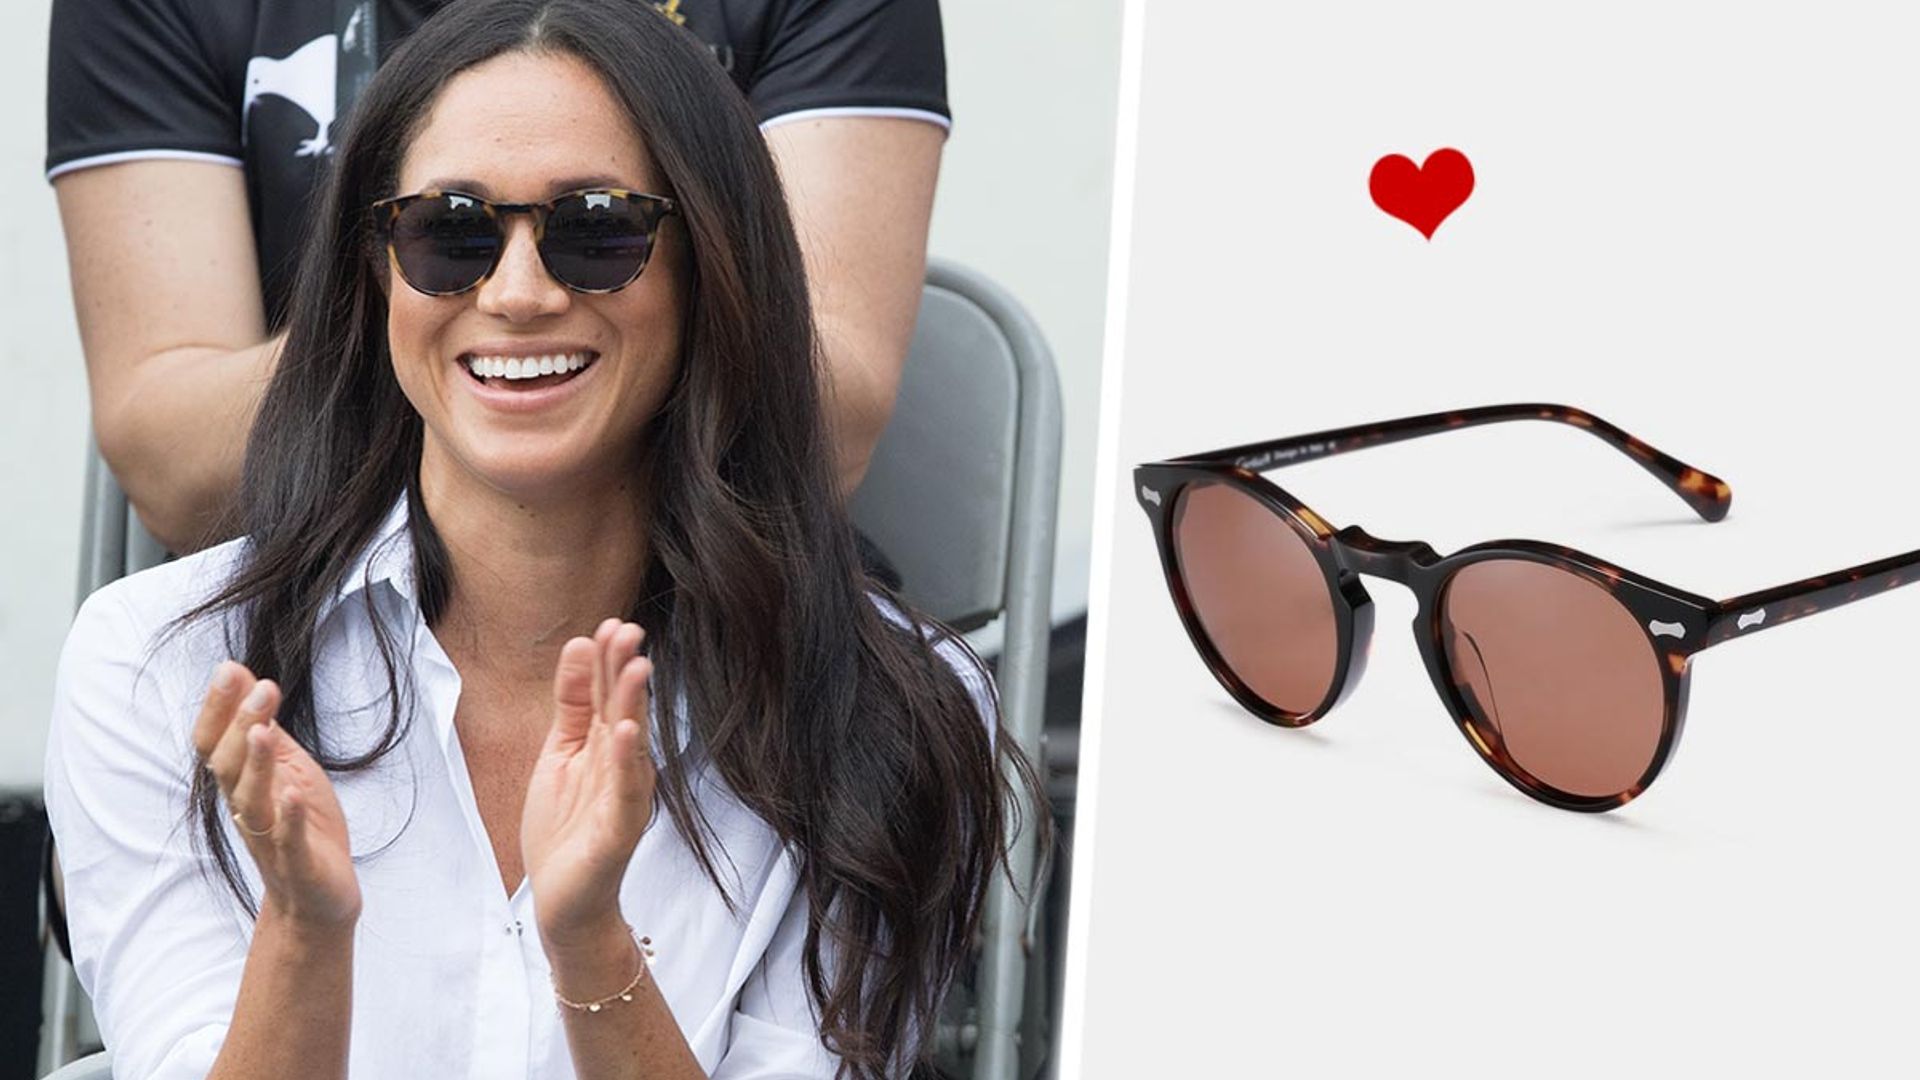 Amazon stock a £25 version of Meghan Markle's £150 sunglasses - and they look so similar